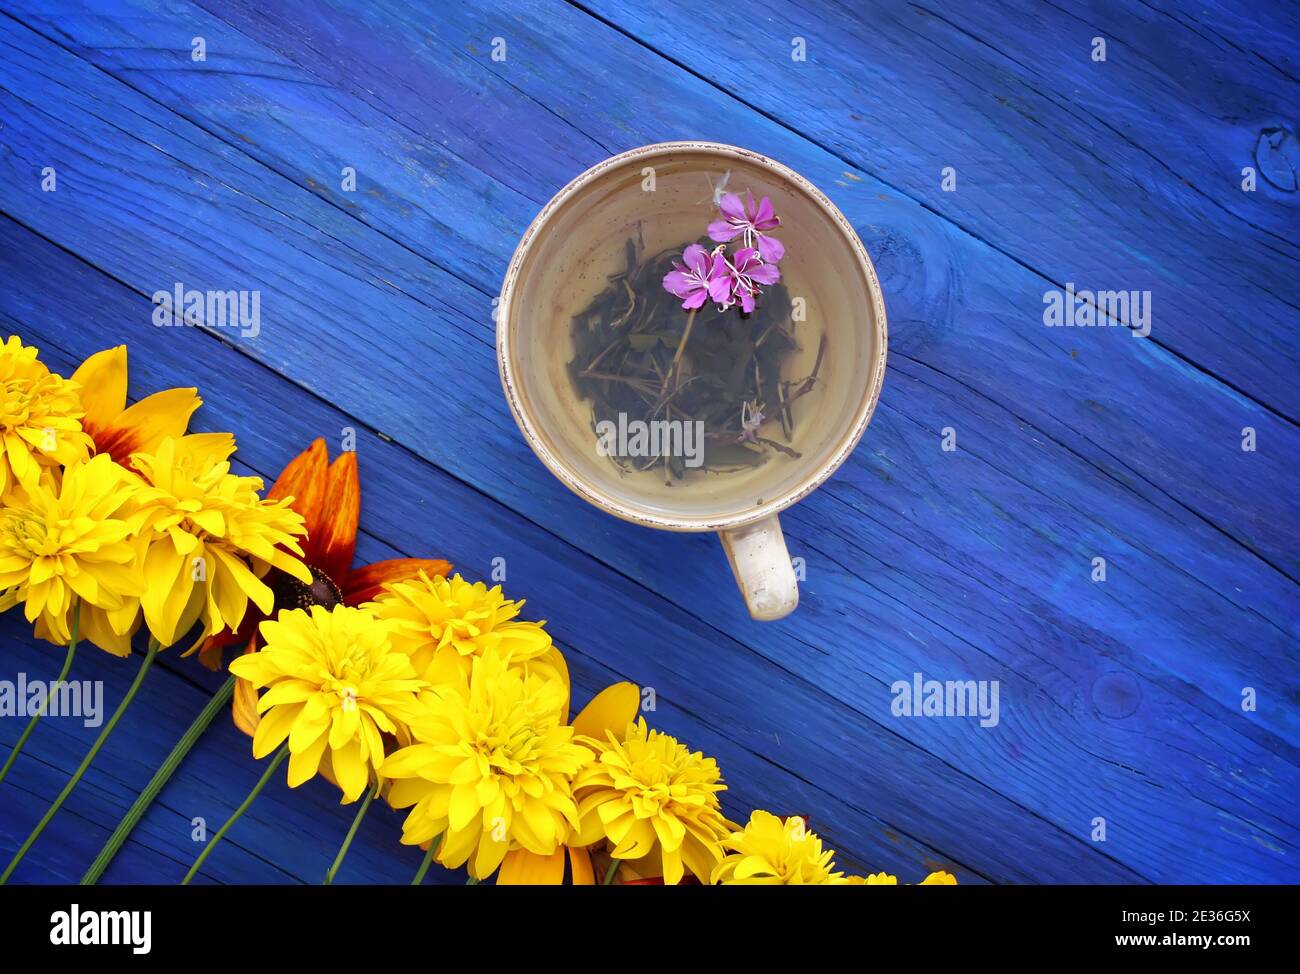 Natural herbal tea with purple fresh flowers and leaves of medical fireweed plant n ceramic cup on blue wooden boards outdoors. Stock Photo